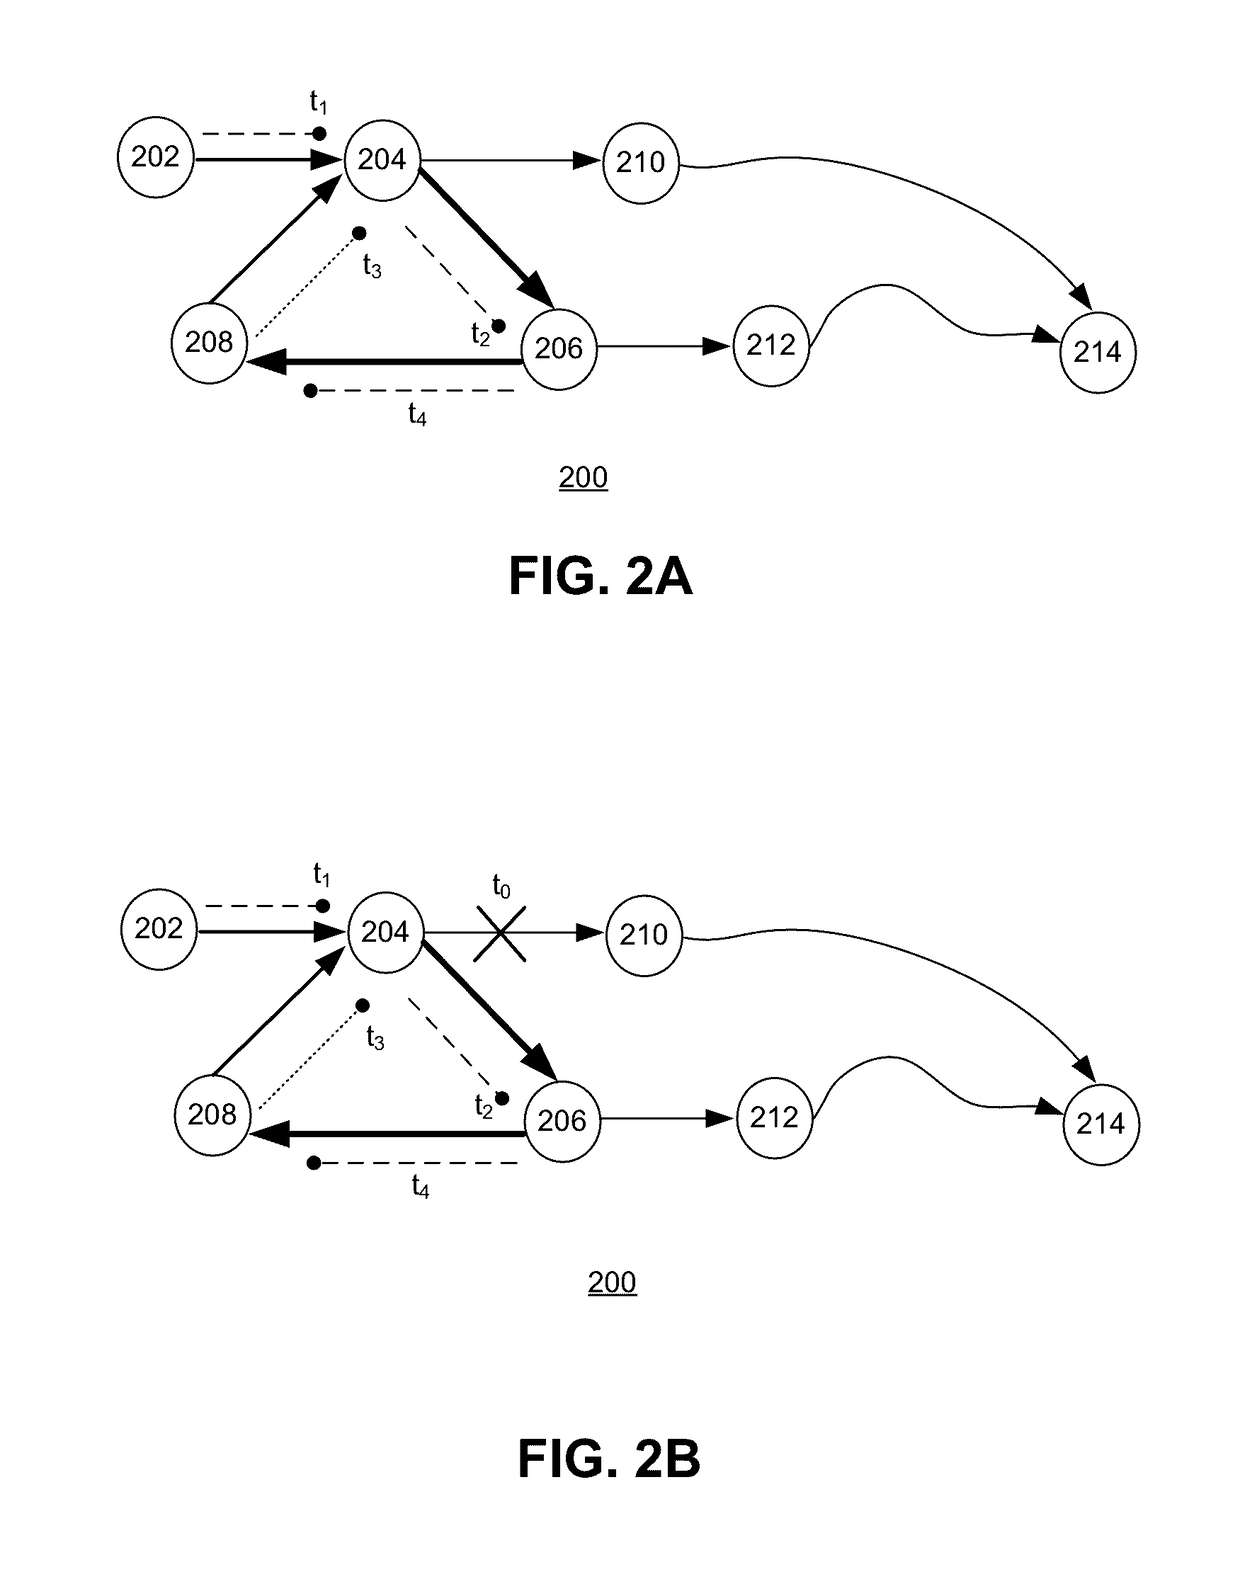 System and method for eliminating undetected interest looping in information-centric networks